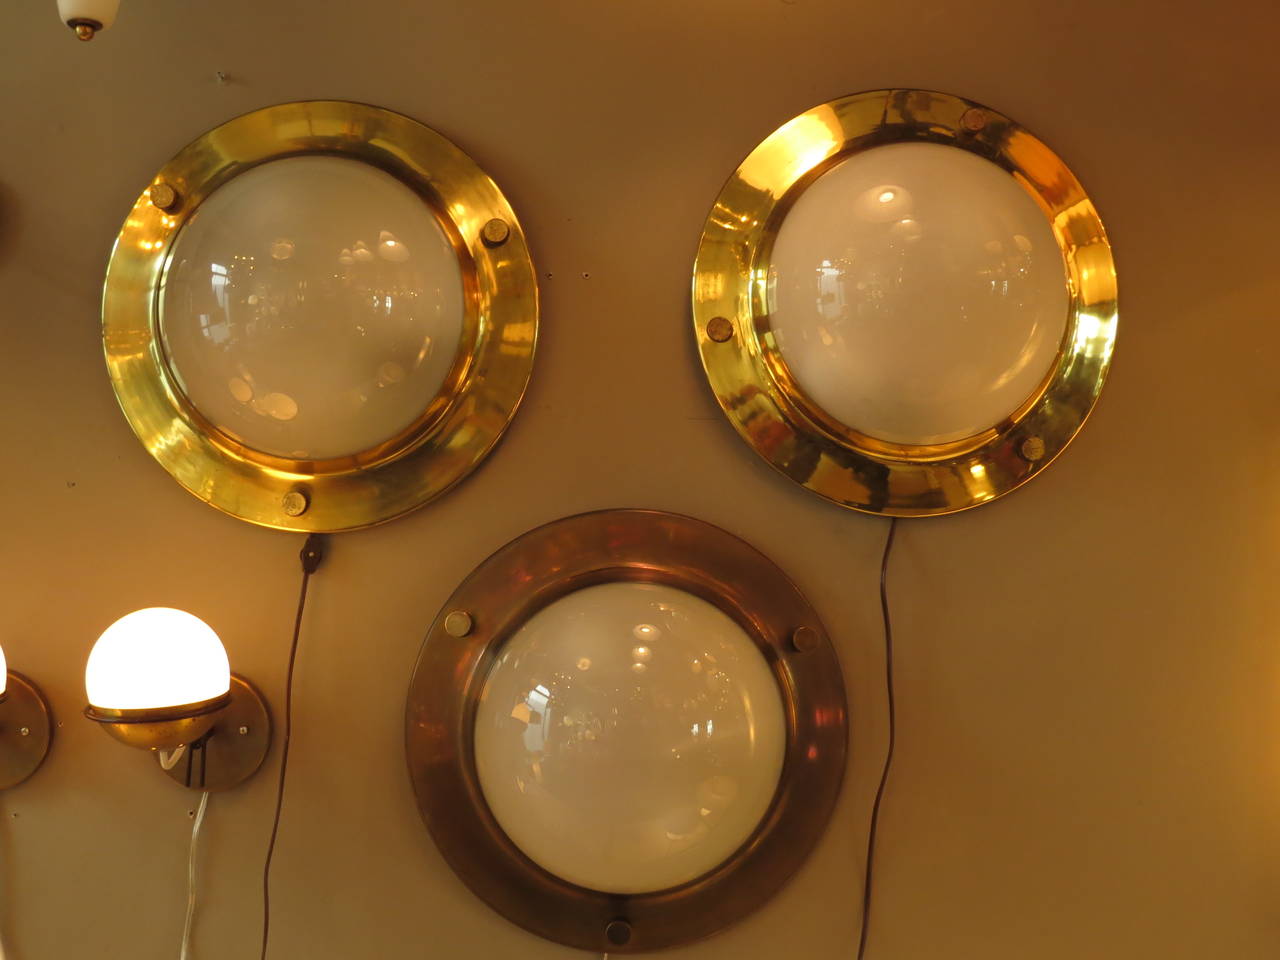 Brass frame and half-globe in glass frosted inside.
Beautiful brass details. Can be used as wall sconces or flush-mount ceiling fixtures.